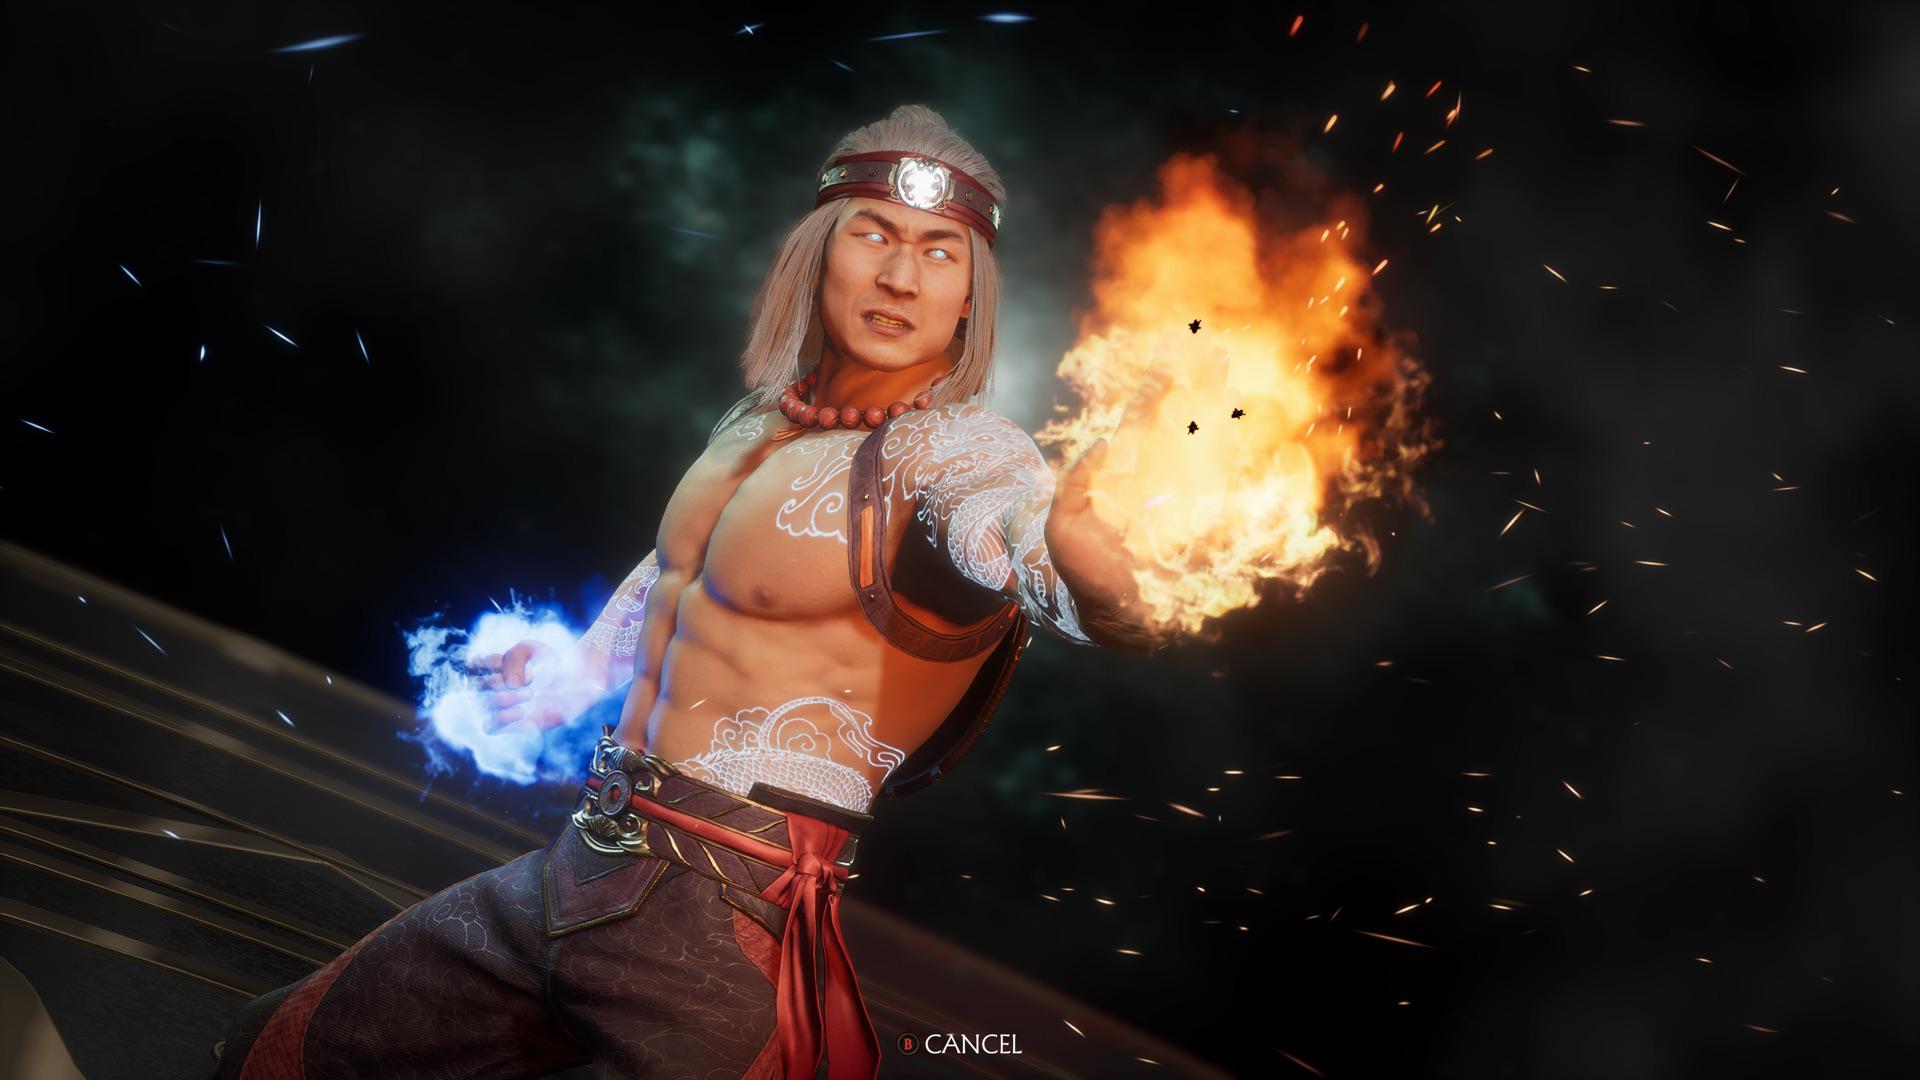 Remember, you have until next Tuesday to get Liu Kang's “Electric